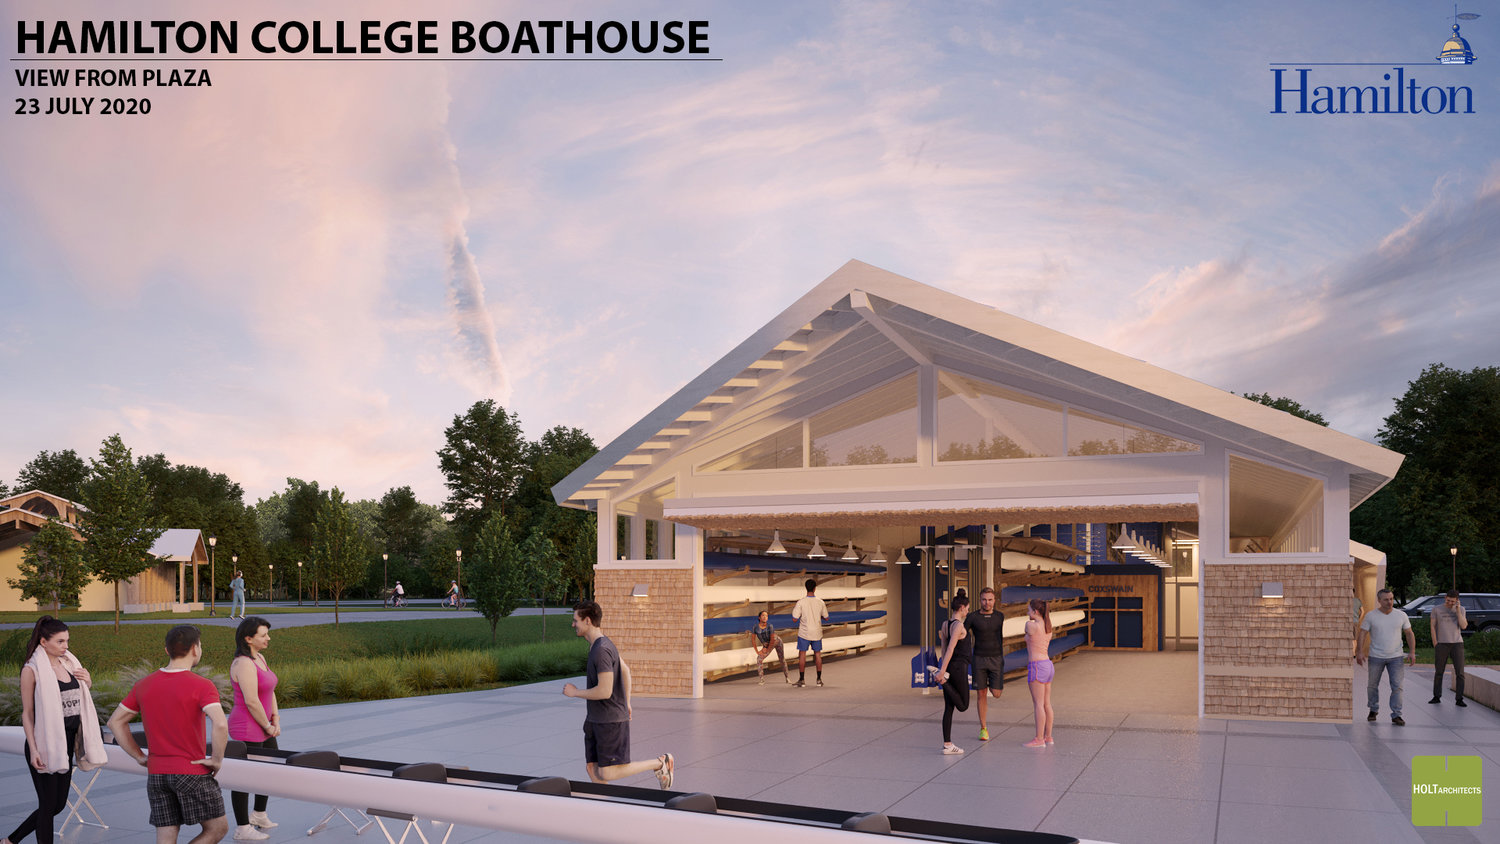 INSIDE VIEW — This computer-generated image shows what the inside of the Hamilton College boathouse will look like once completed at Bellamy Harbor Park.